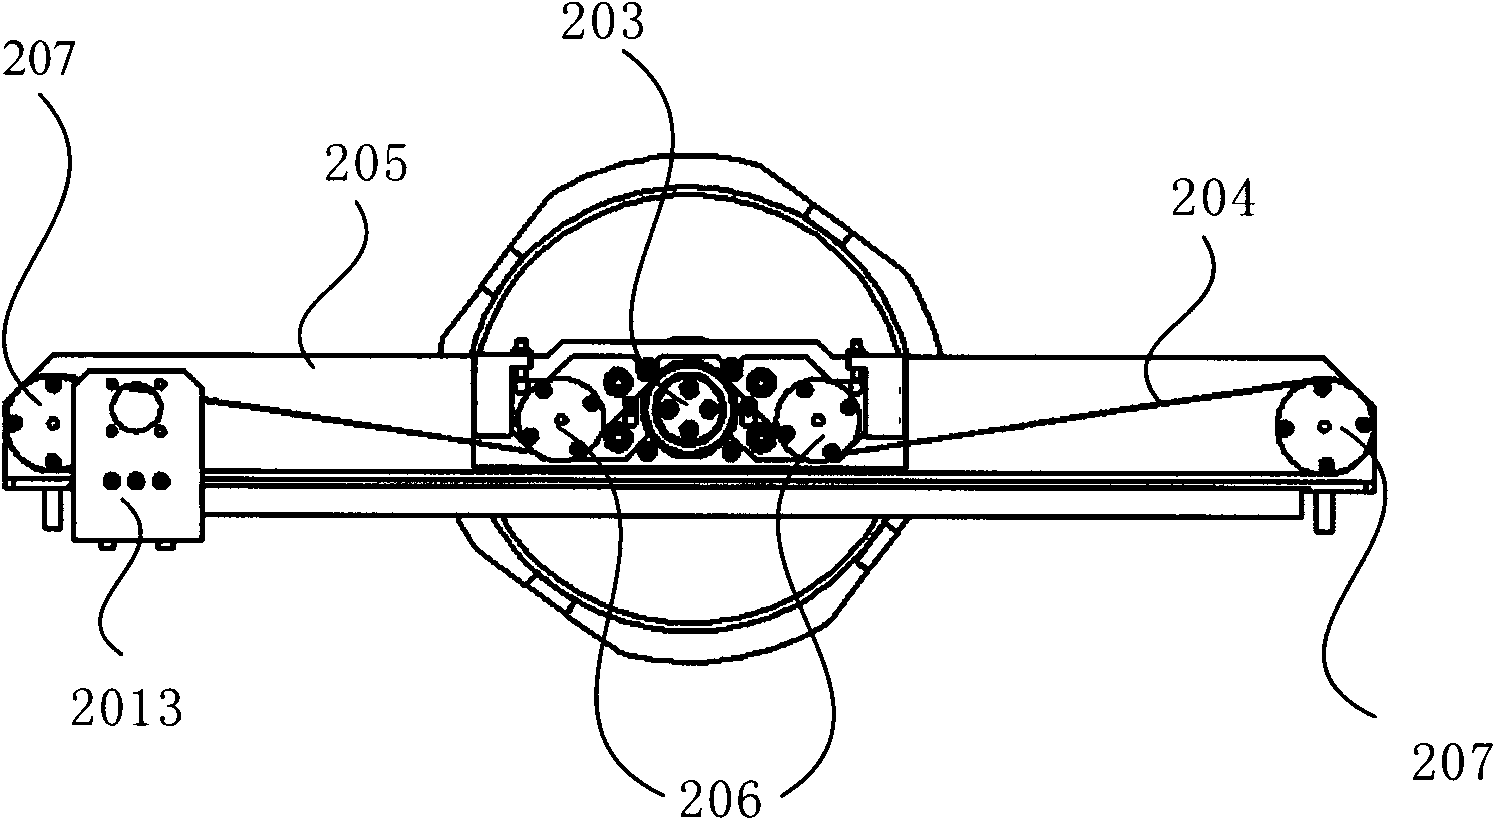 Conveying device and system